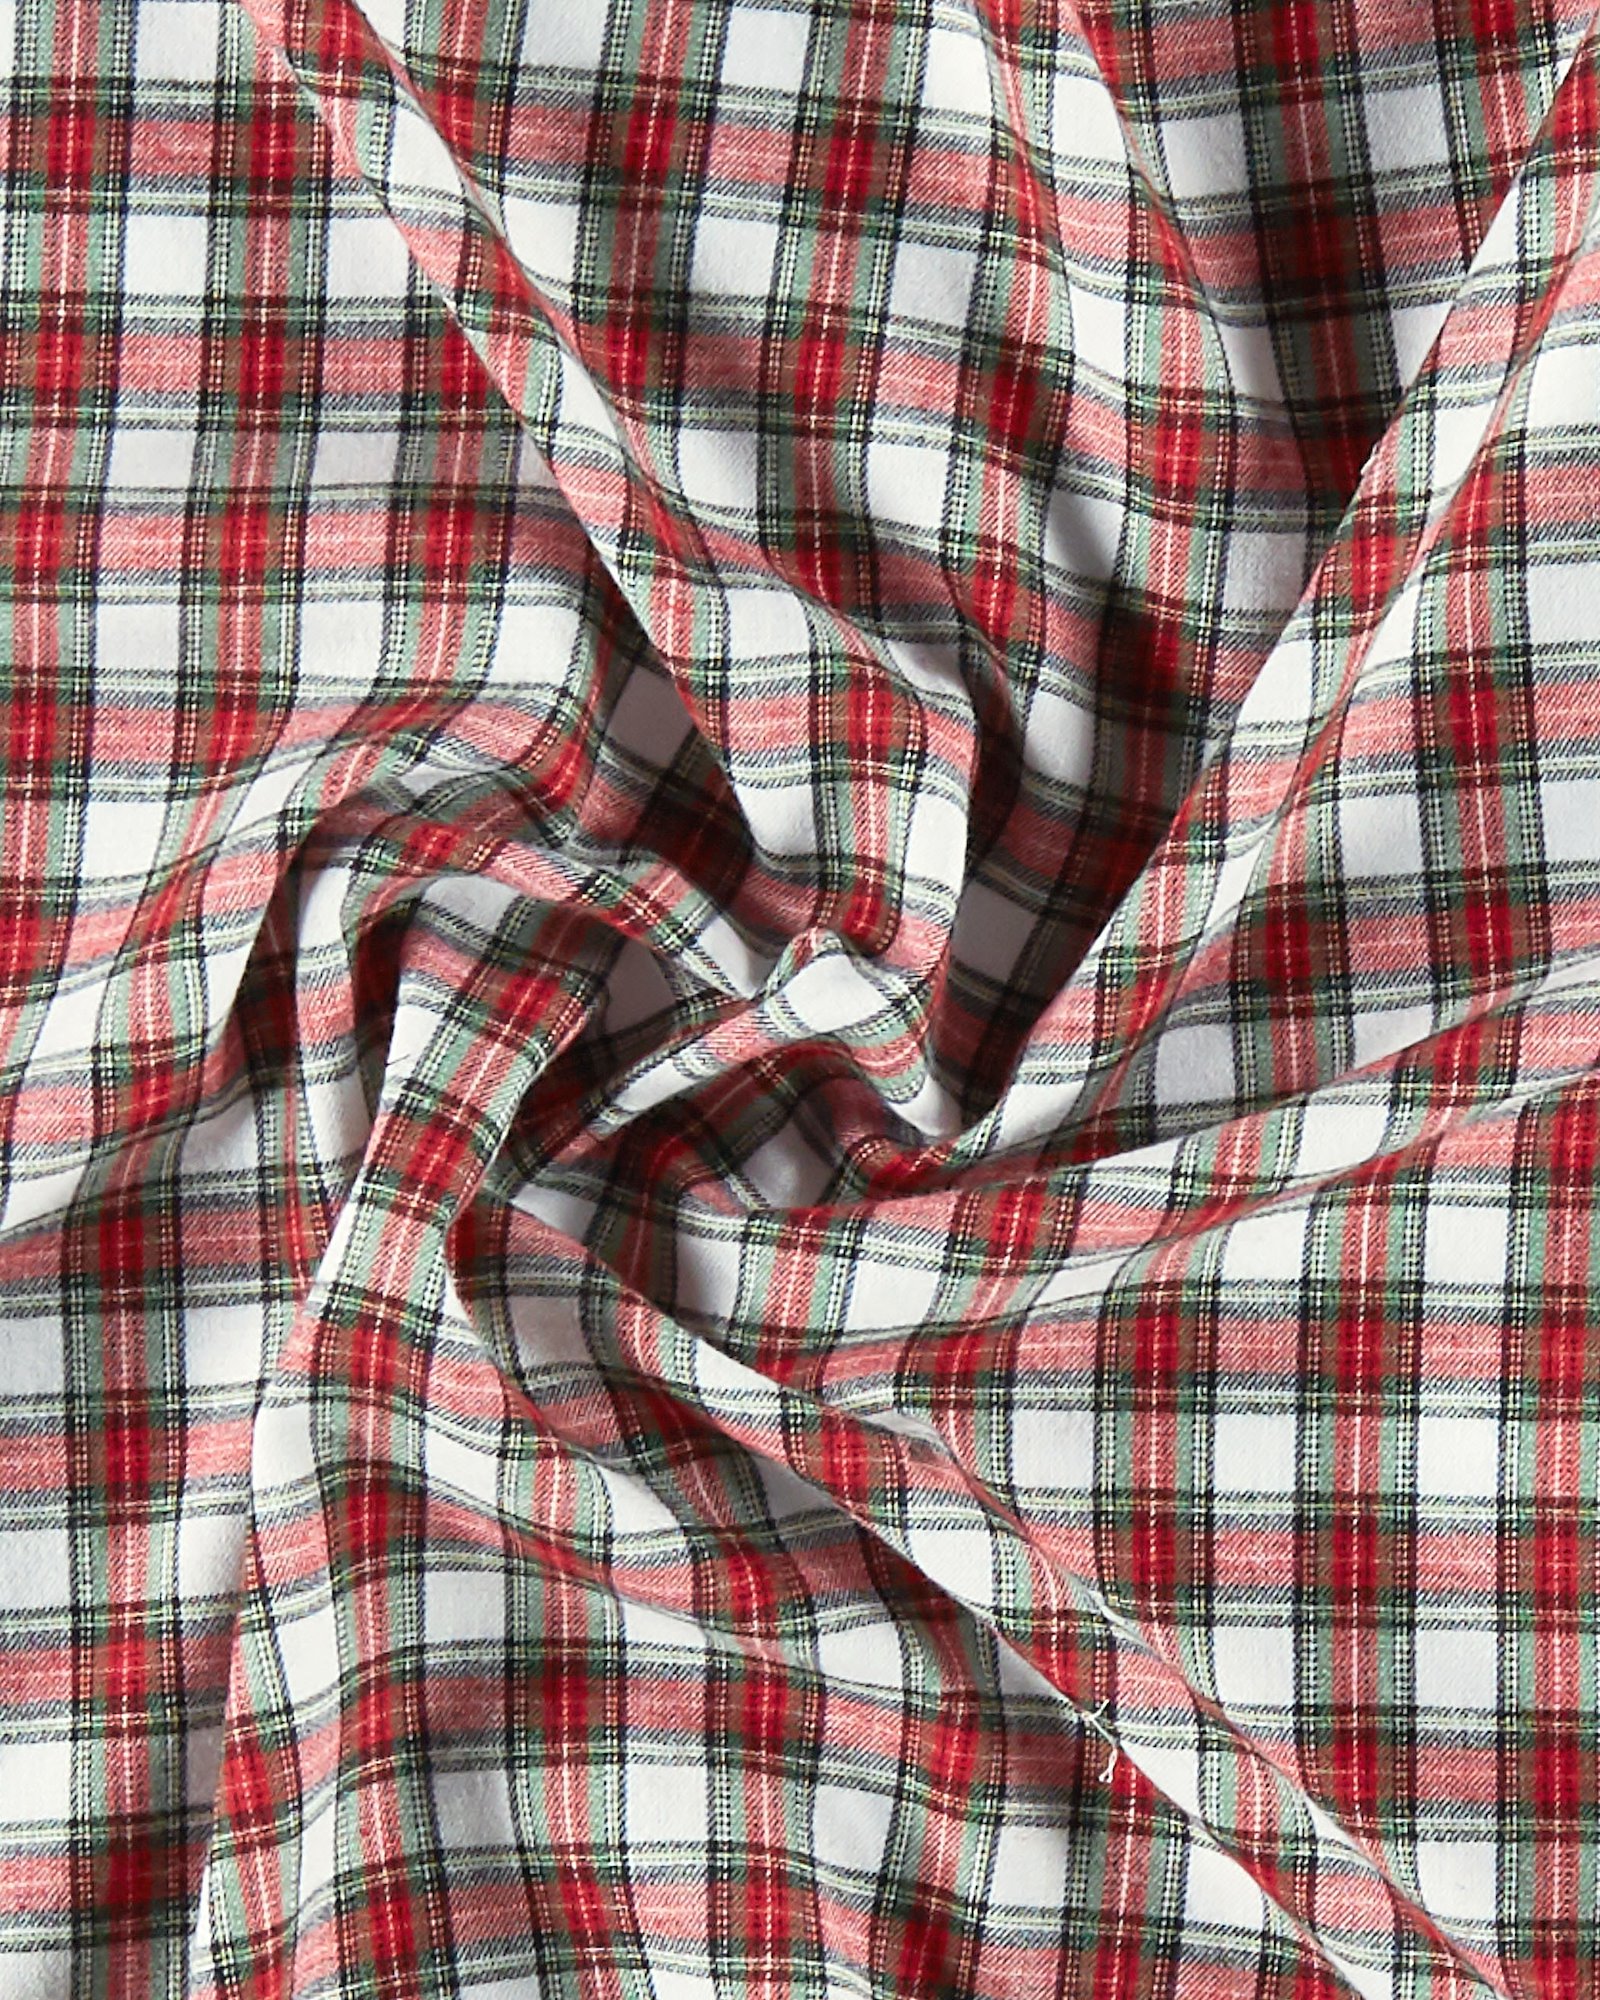 Woven cotton nature/red/green YD check 500313_pack